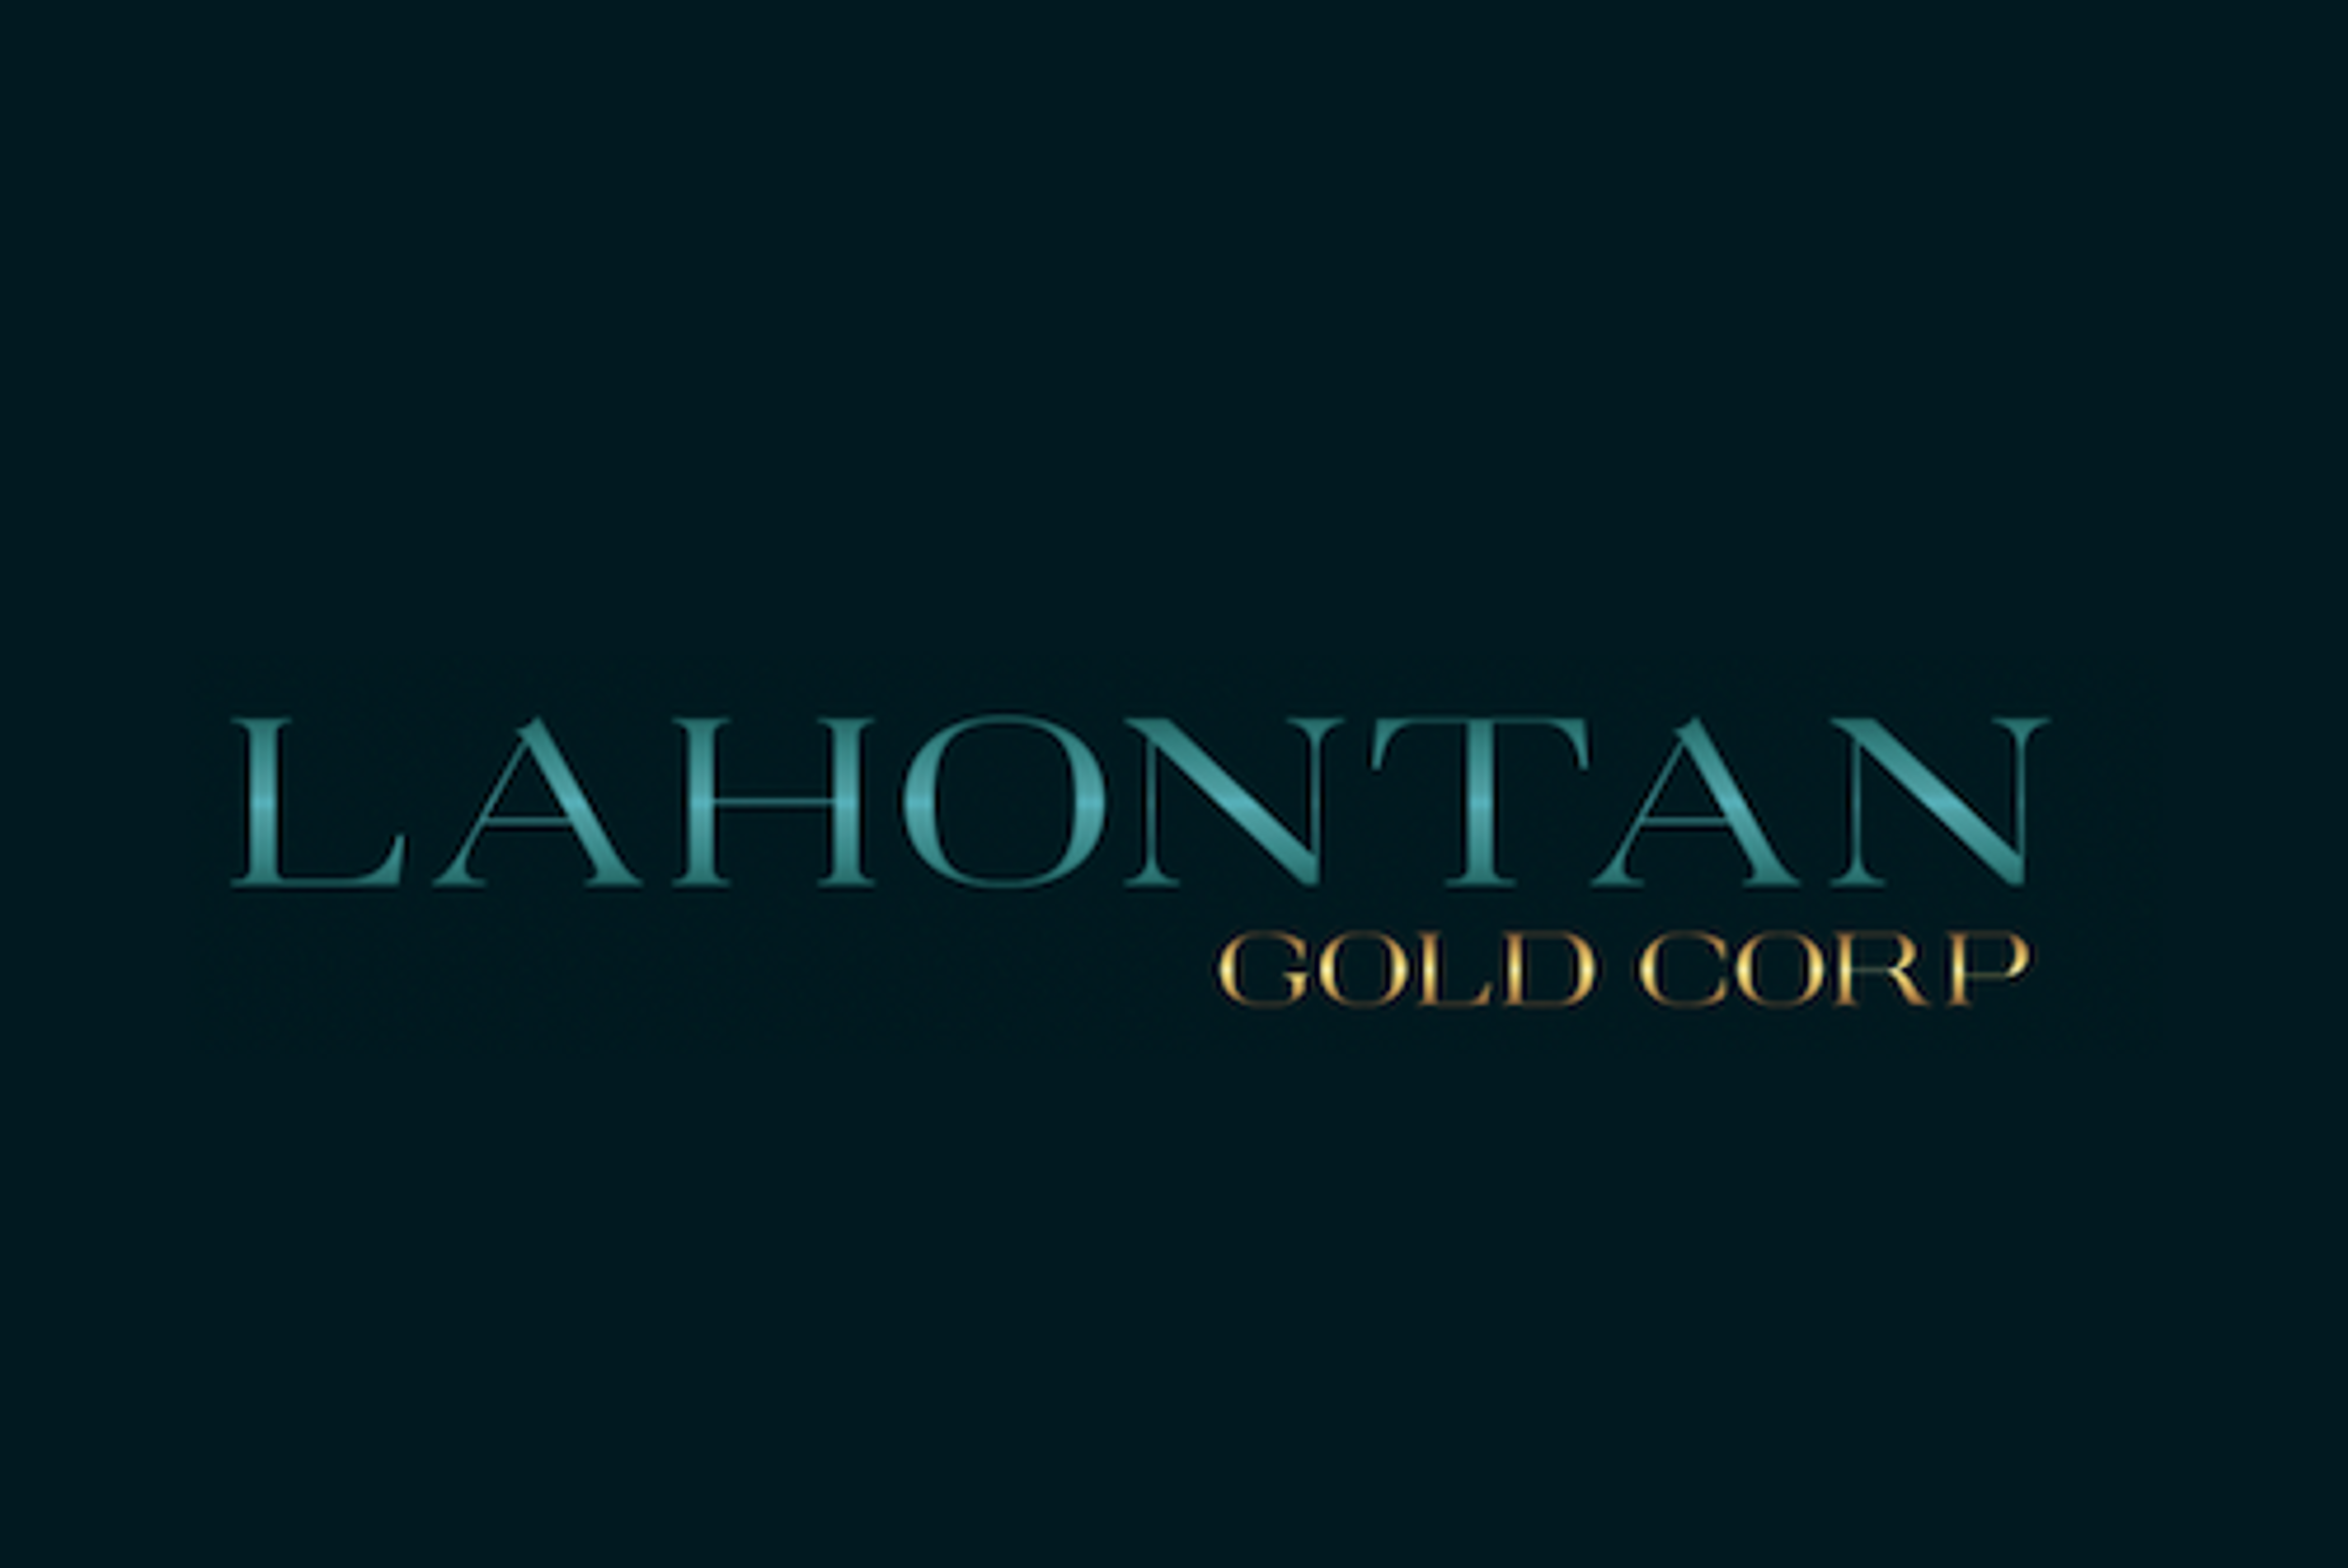 Lahontan Gold Corp Commences Trading on TSX Venture Exchange, Announces Board Appointments